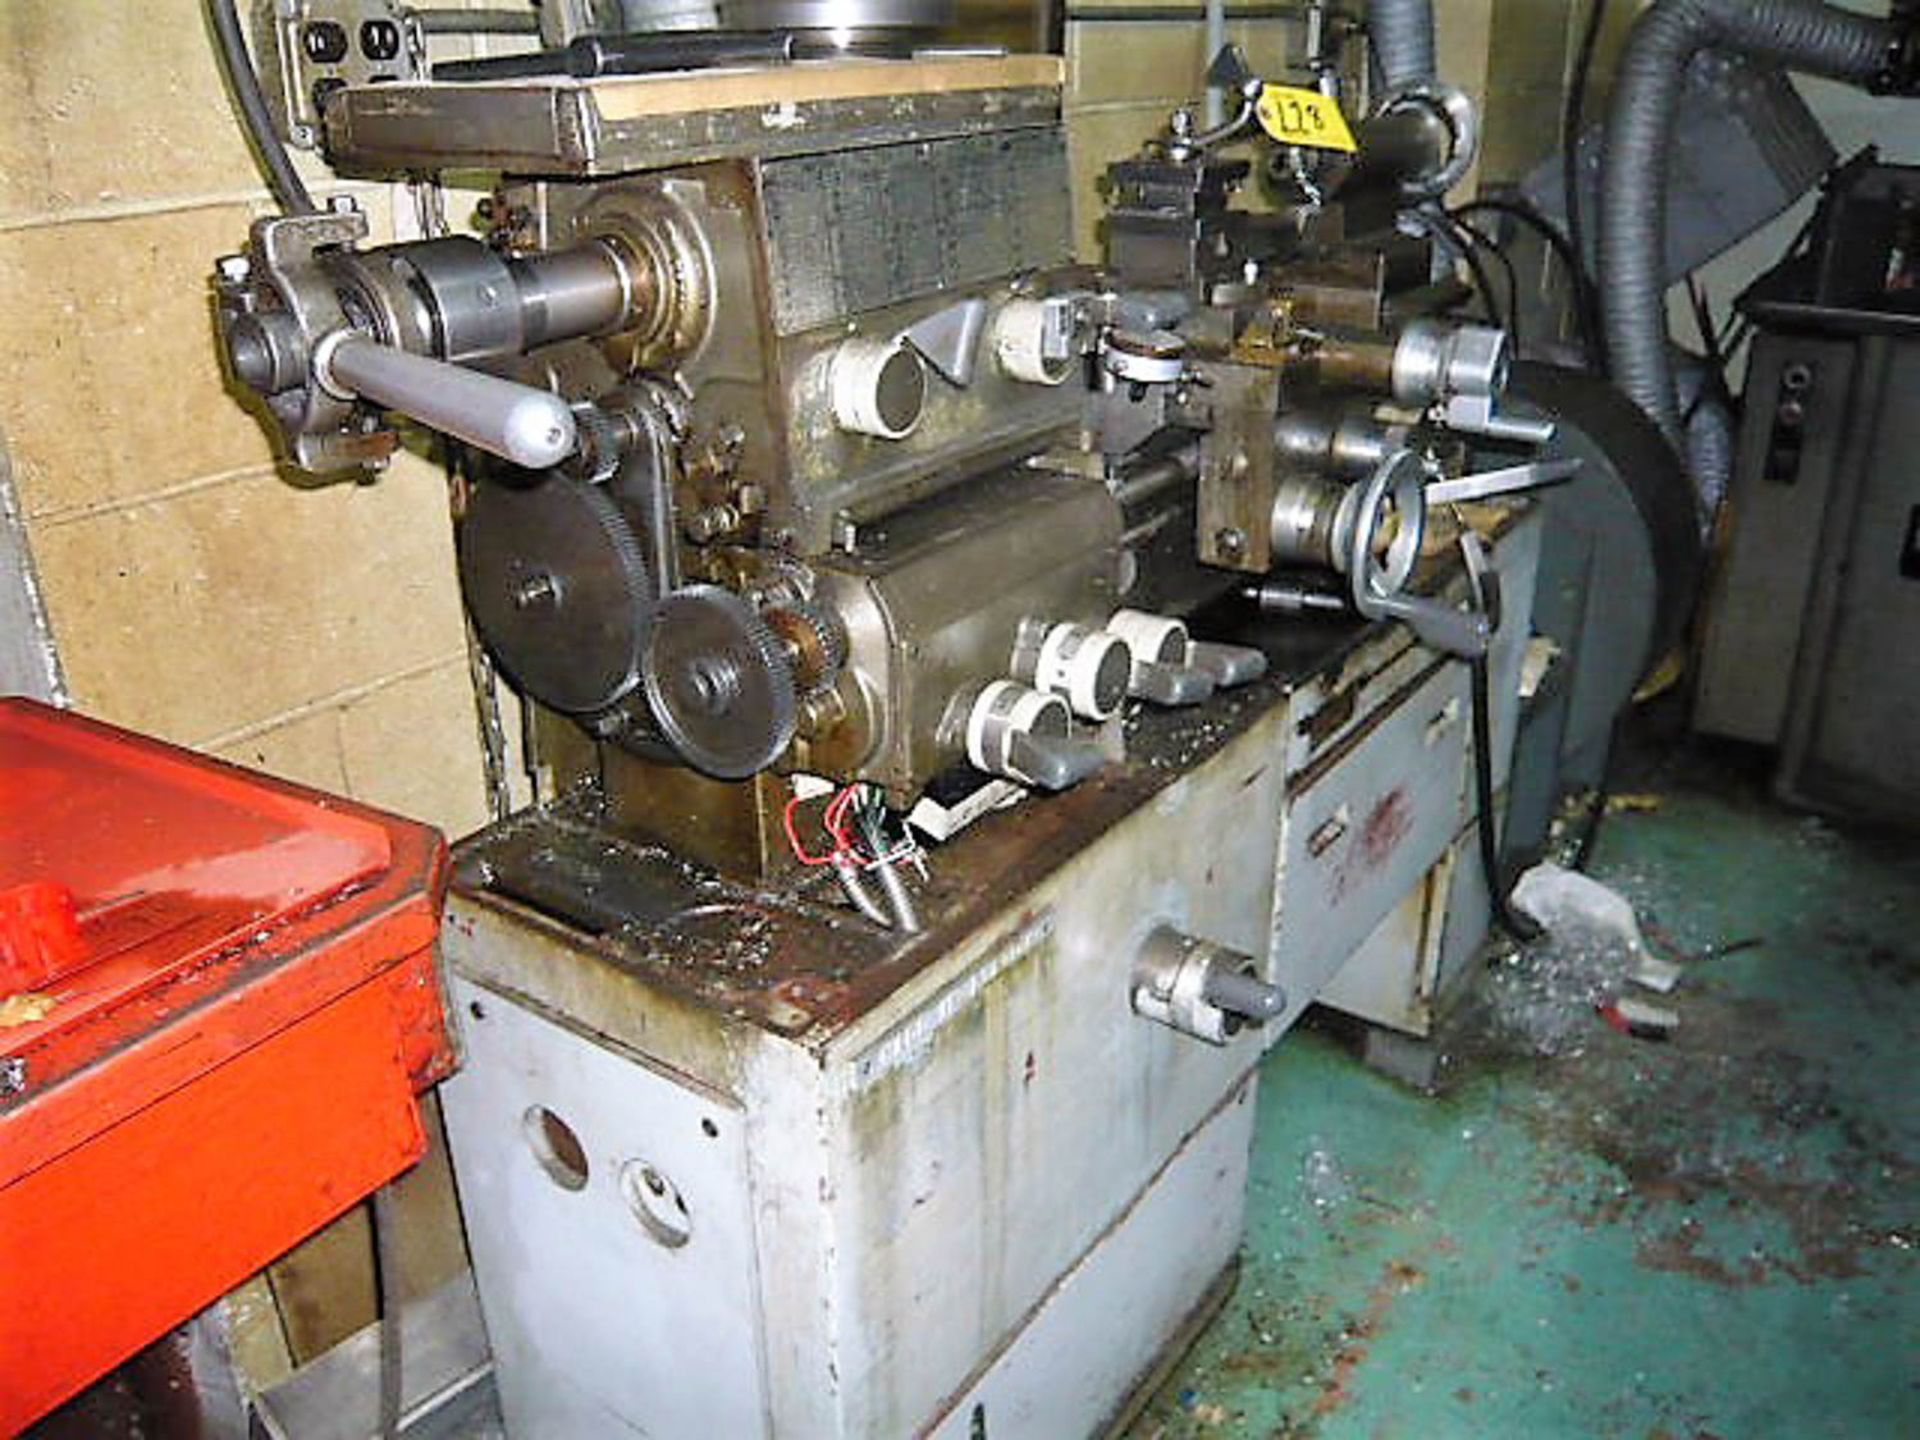 MADE IN BELGIUM 12" X 20" LATHE, INCH / METRIC THREADING, TOOL POST, 5C COLLET CHUCK, 6" 3-JAW - Image 2 of 6